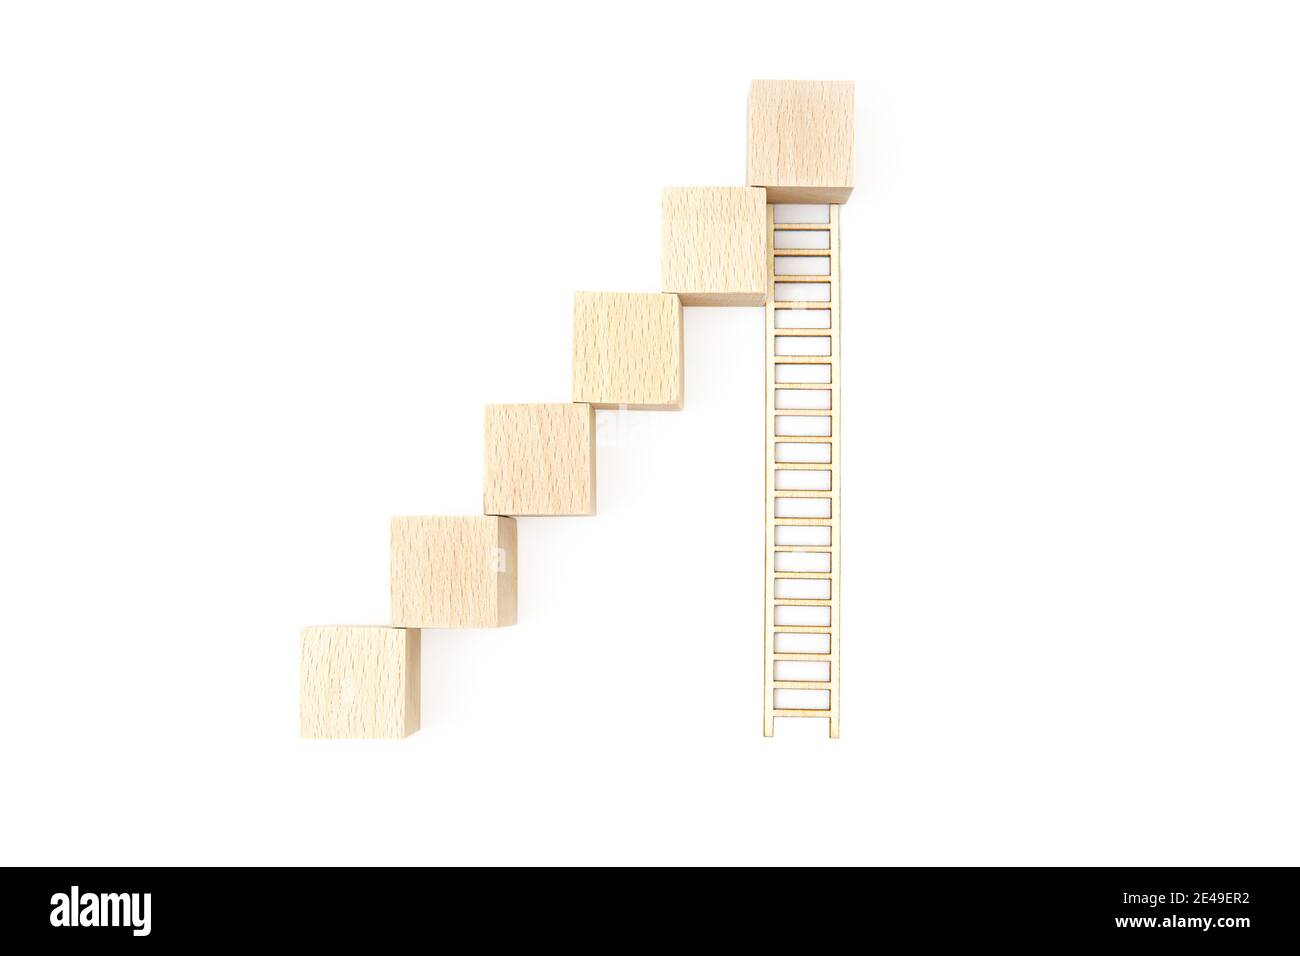 Staircase made of toy wooden blocks and a long wooden ladder isolated on white background. Career building concept. Stock Photo